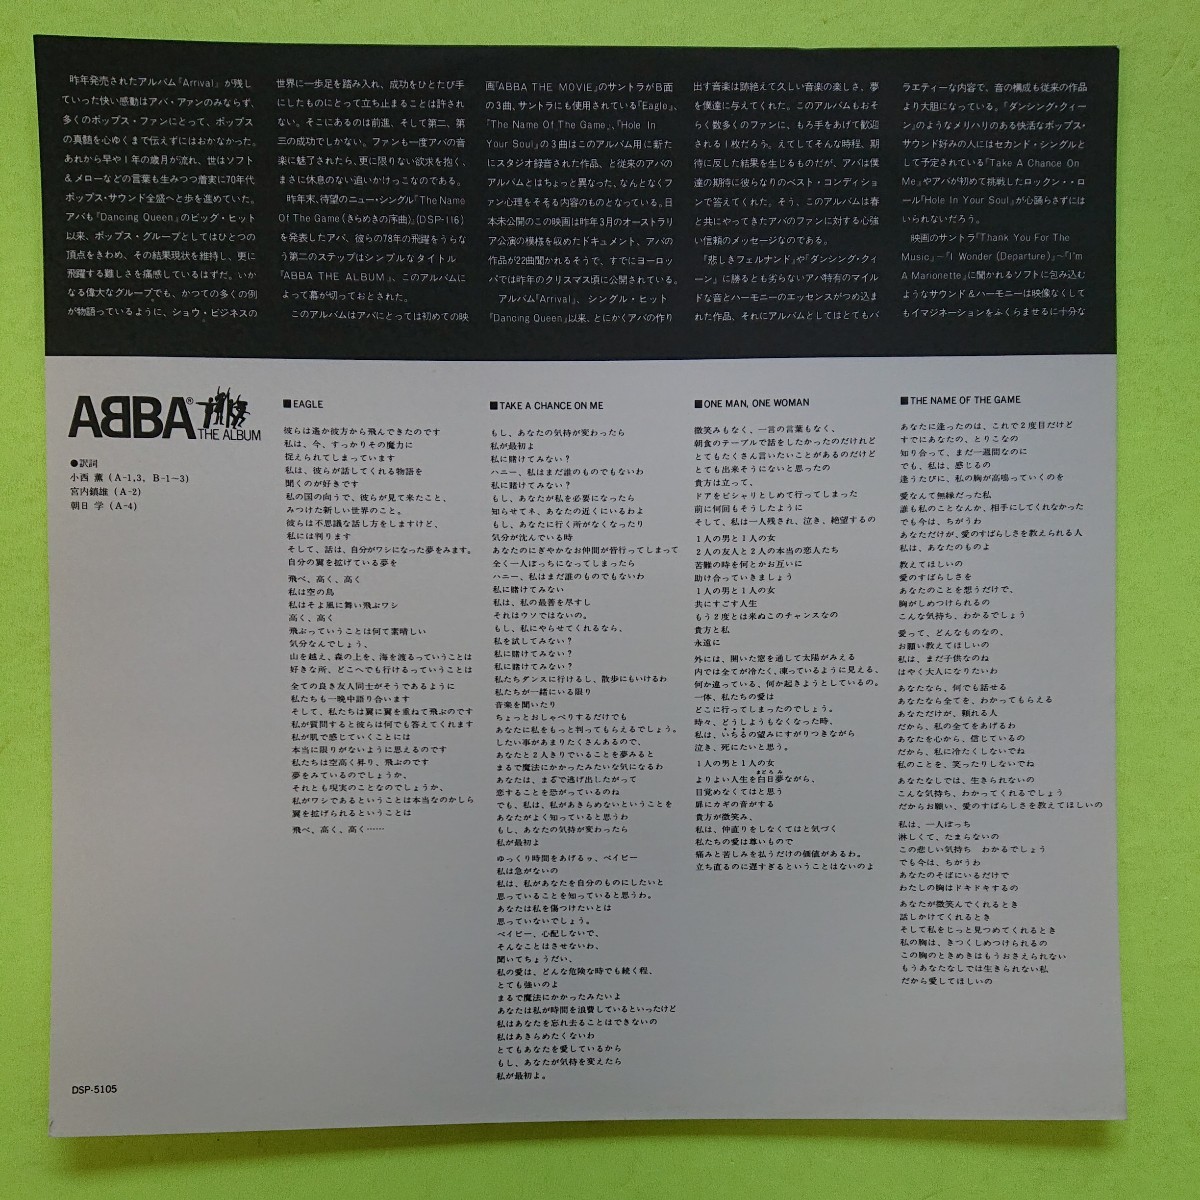 LP /ABBA (THE ALBUM)*5 point and more together ( postage 0 jpy ) free *